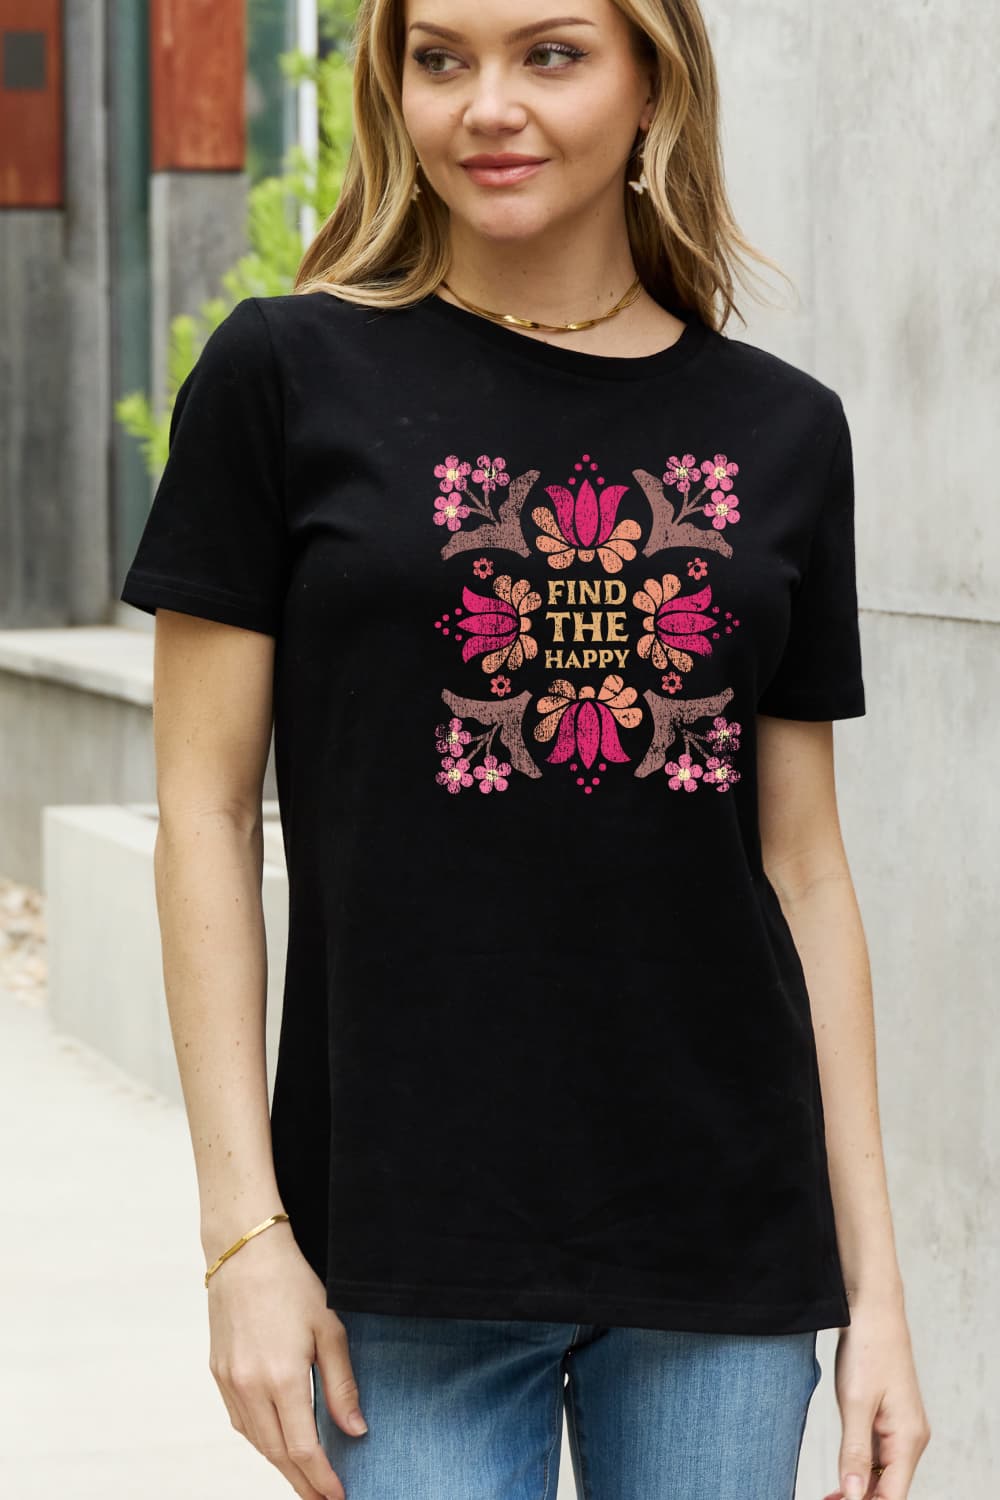 Simply Love FIND THE HAPPY Graphic Cotton Tee